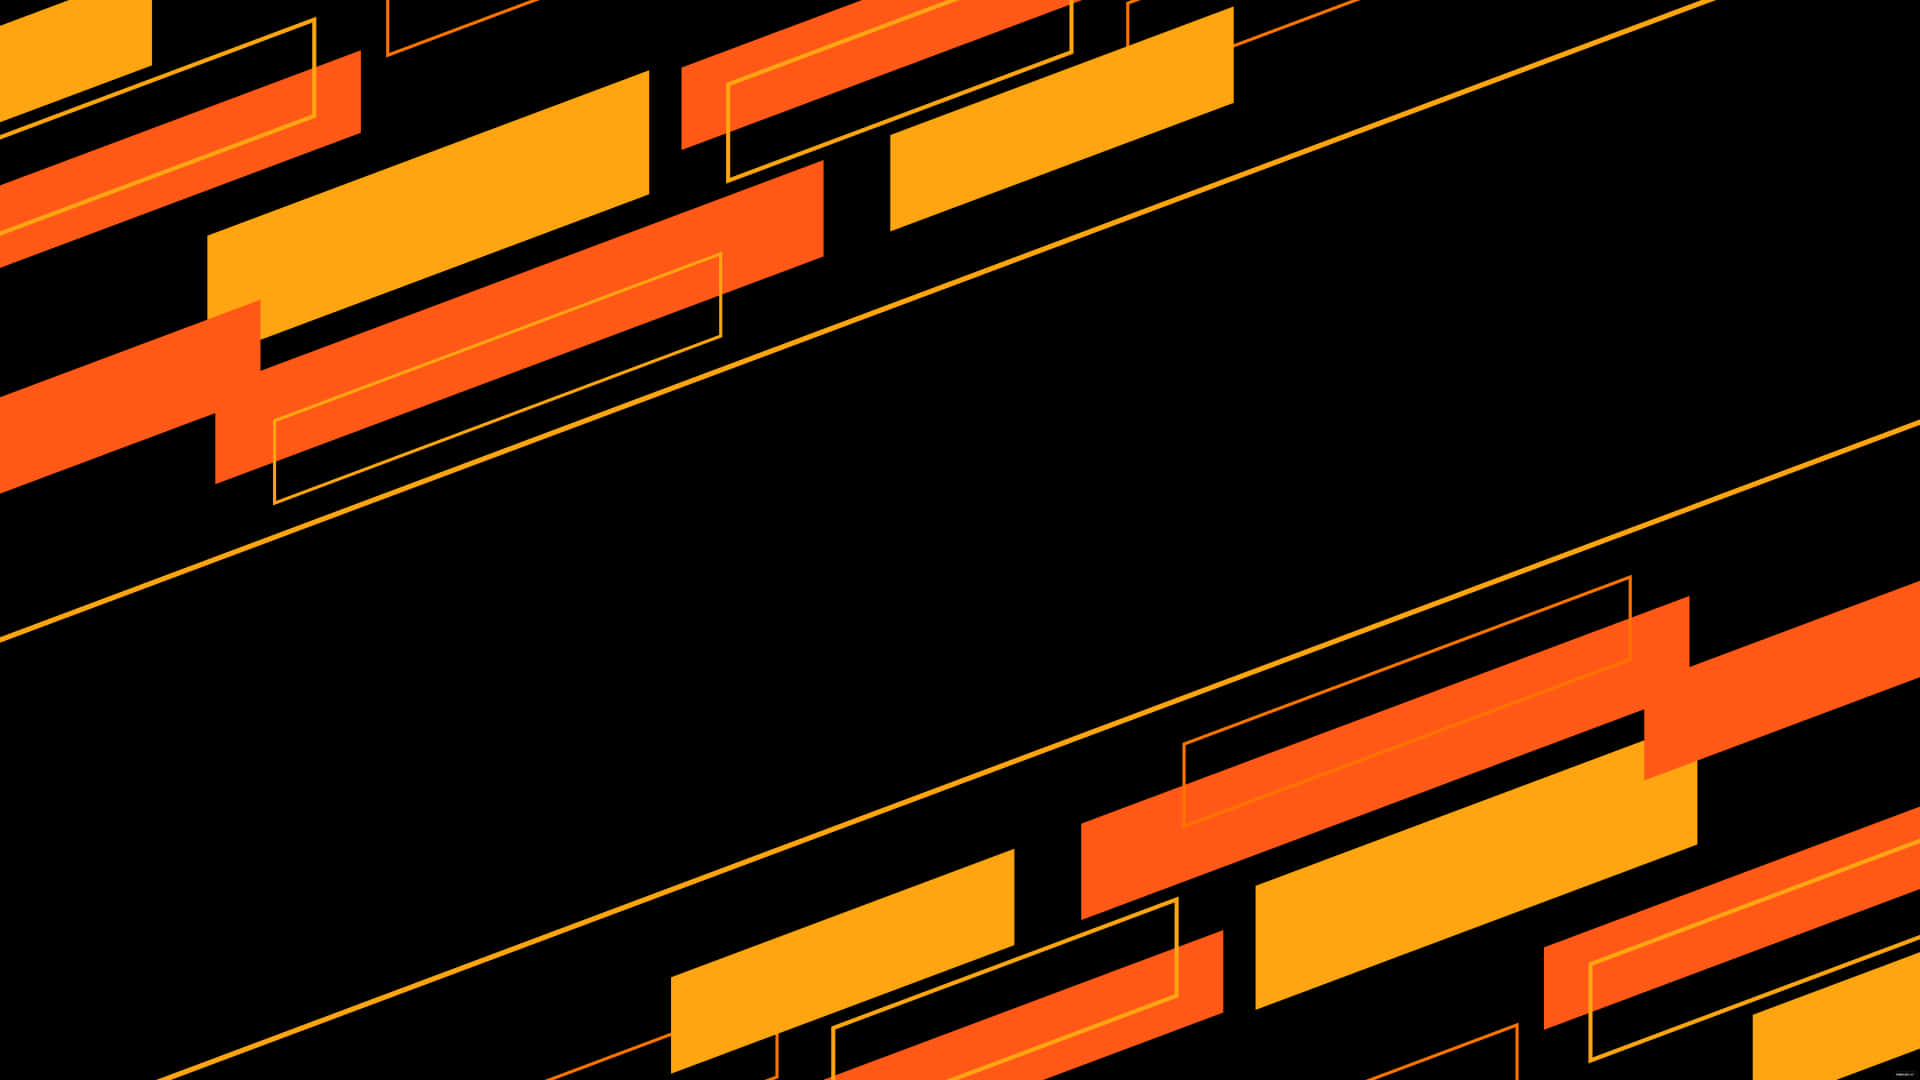 Abstract Black and Orange Explosion Wallpaper